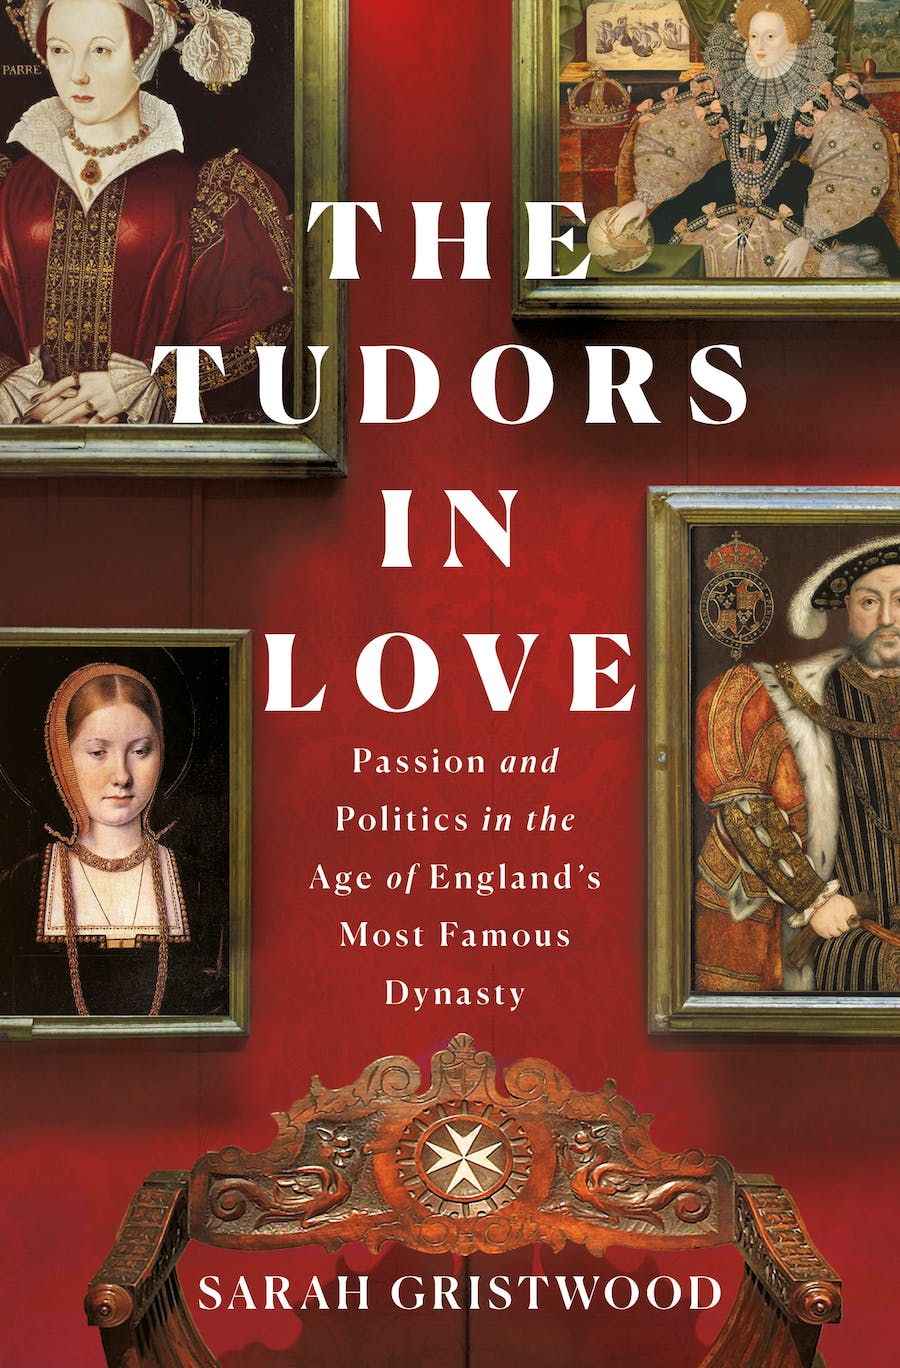 The Tudors in Love: Passion and Politics in the Age of England’s Most Famous Dynasty